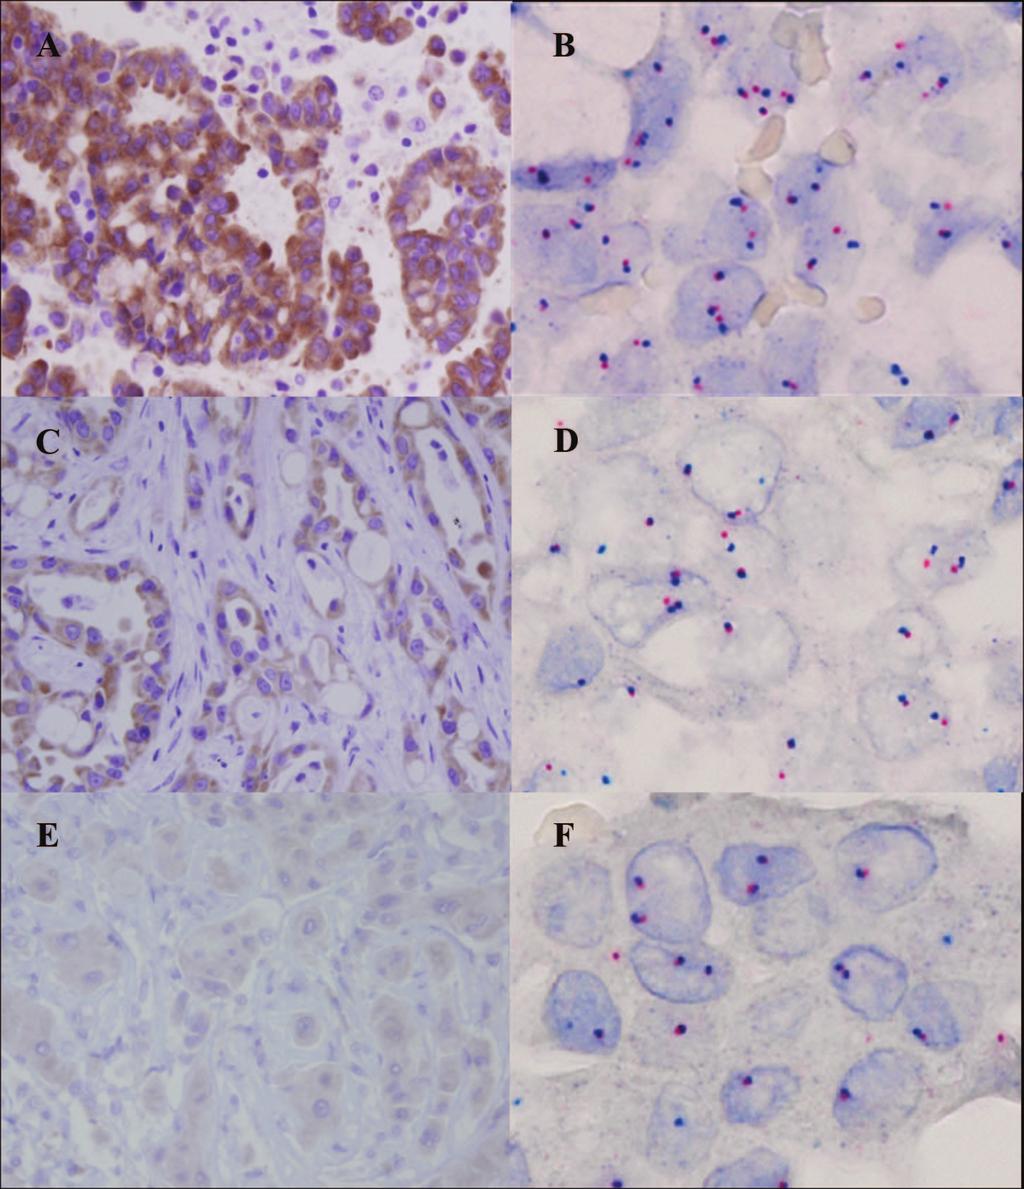 Kim et al. Journal of Thoracic Oncology Volume 6, Number 8, August 2011 FIGURE 2.